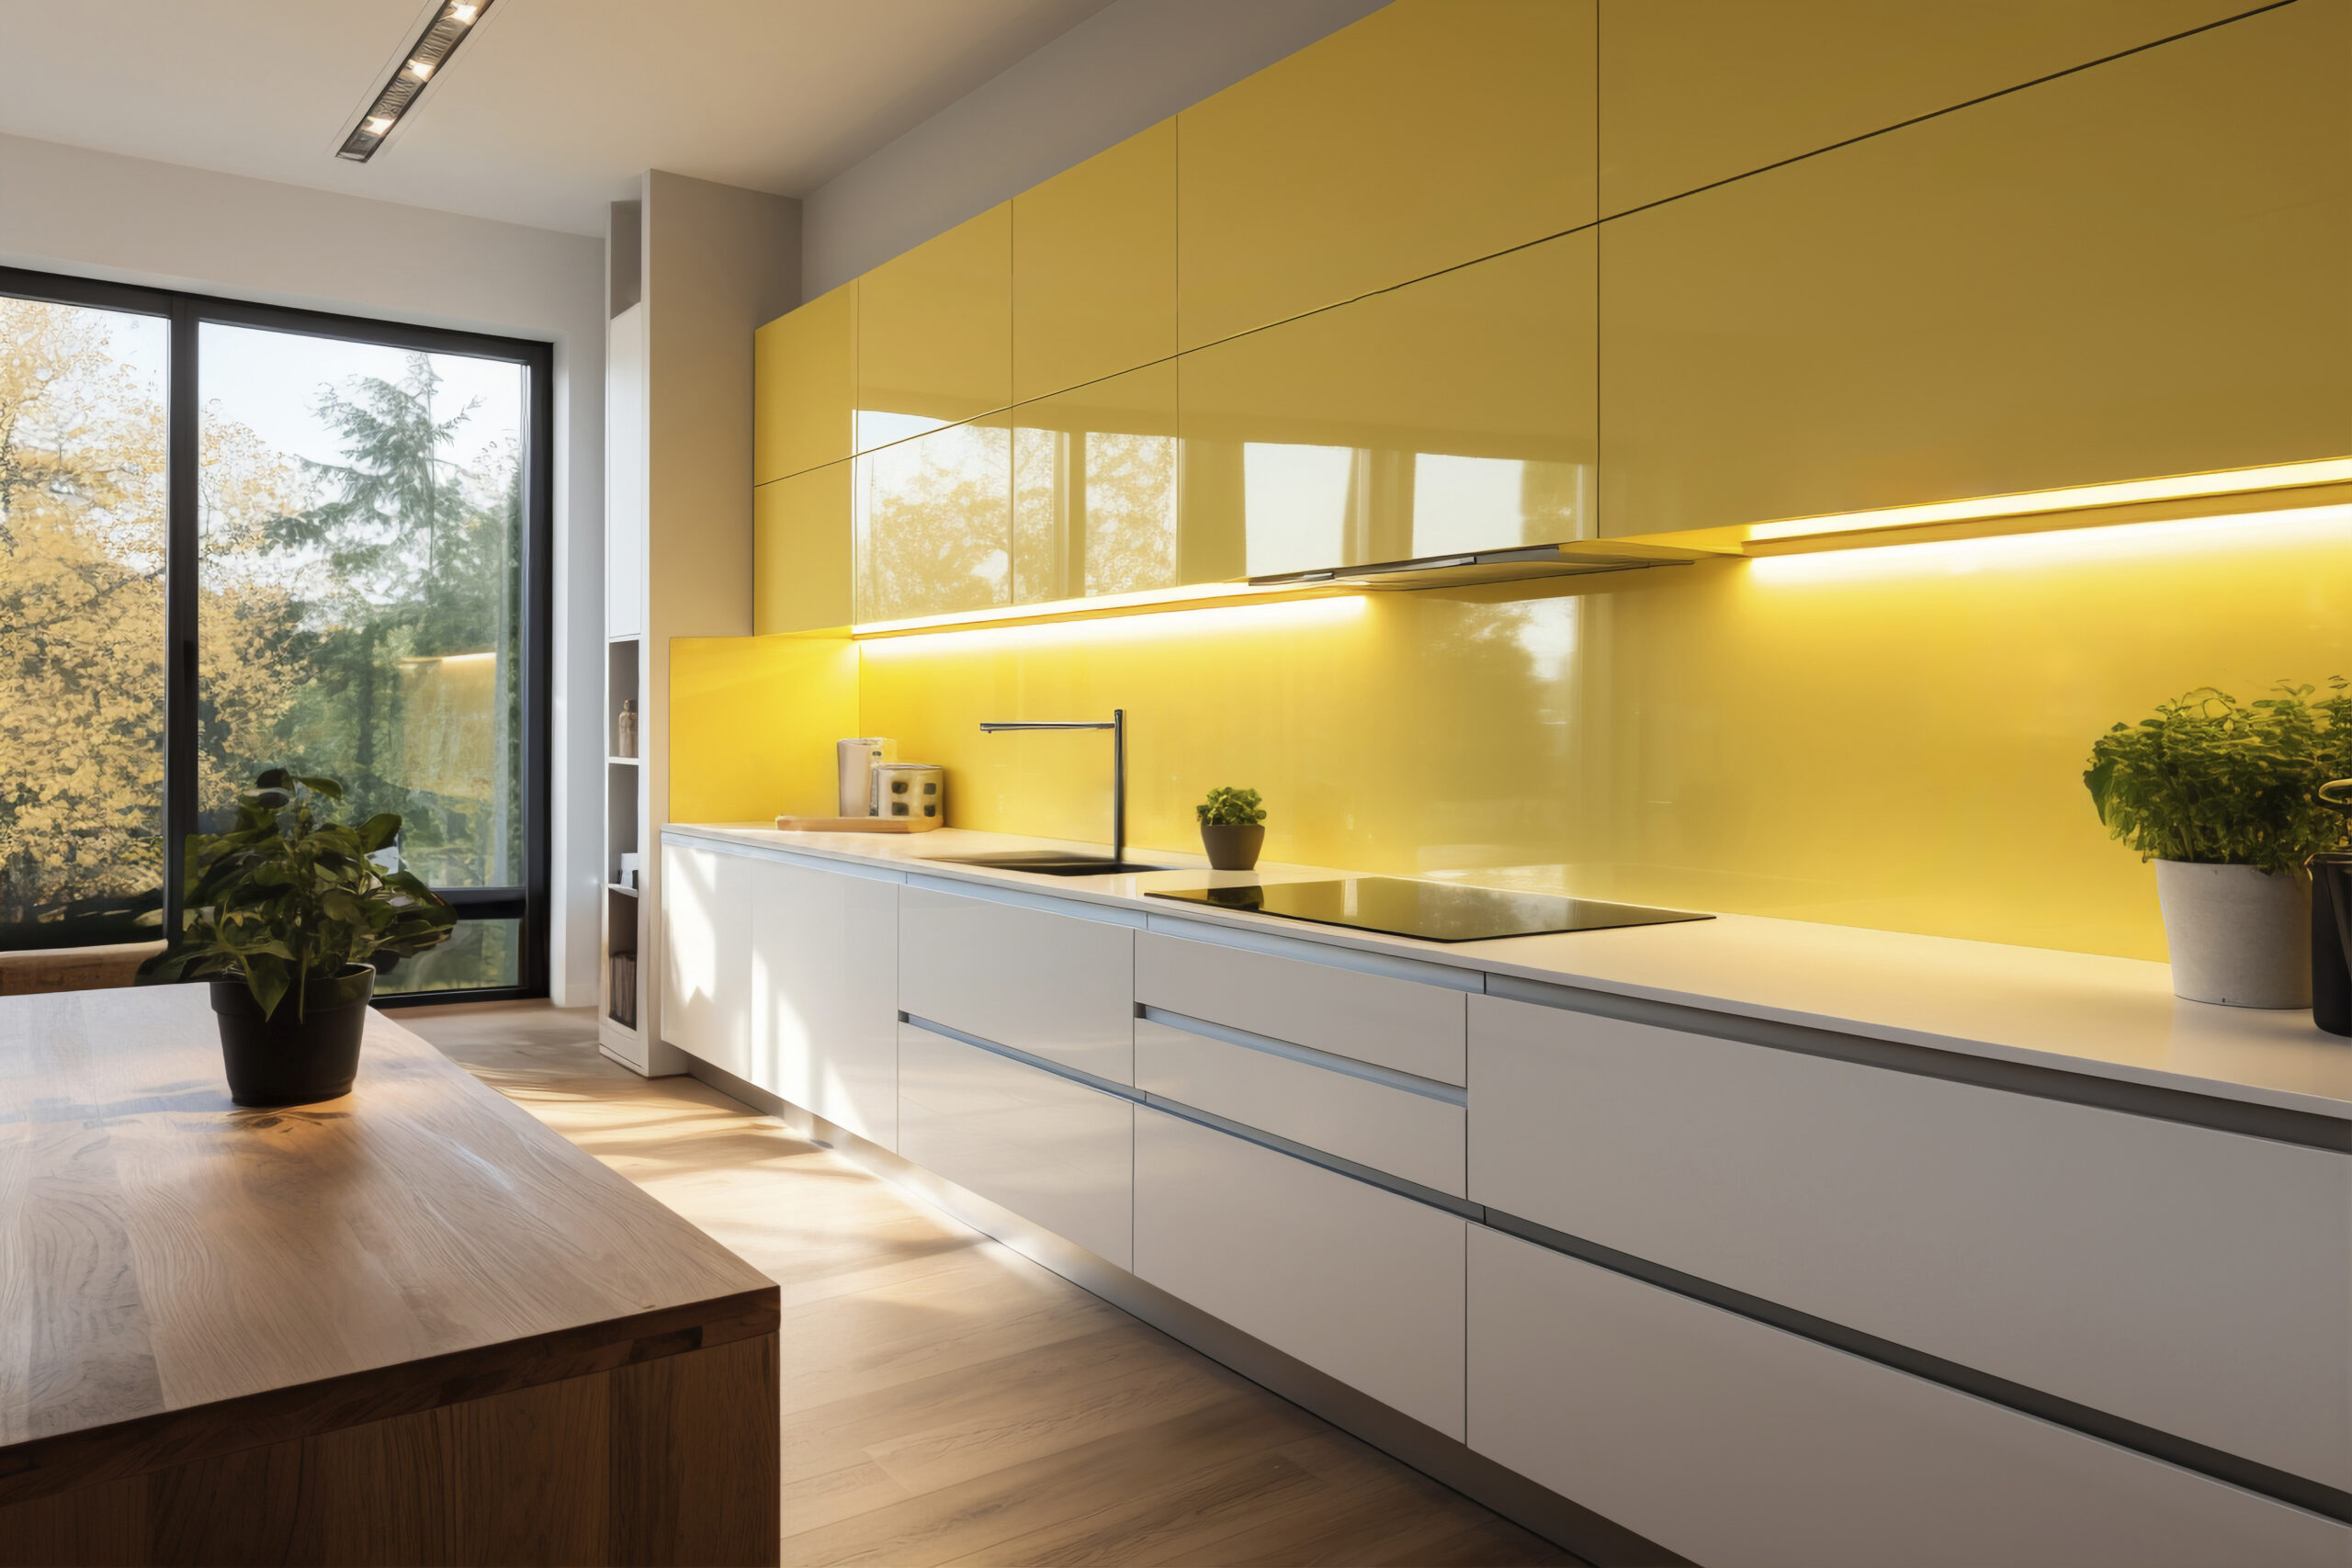 The Advantages of High Gloss Laminates in Contemporary Kitchen Design